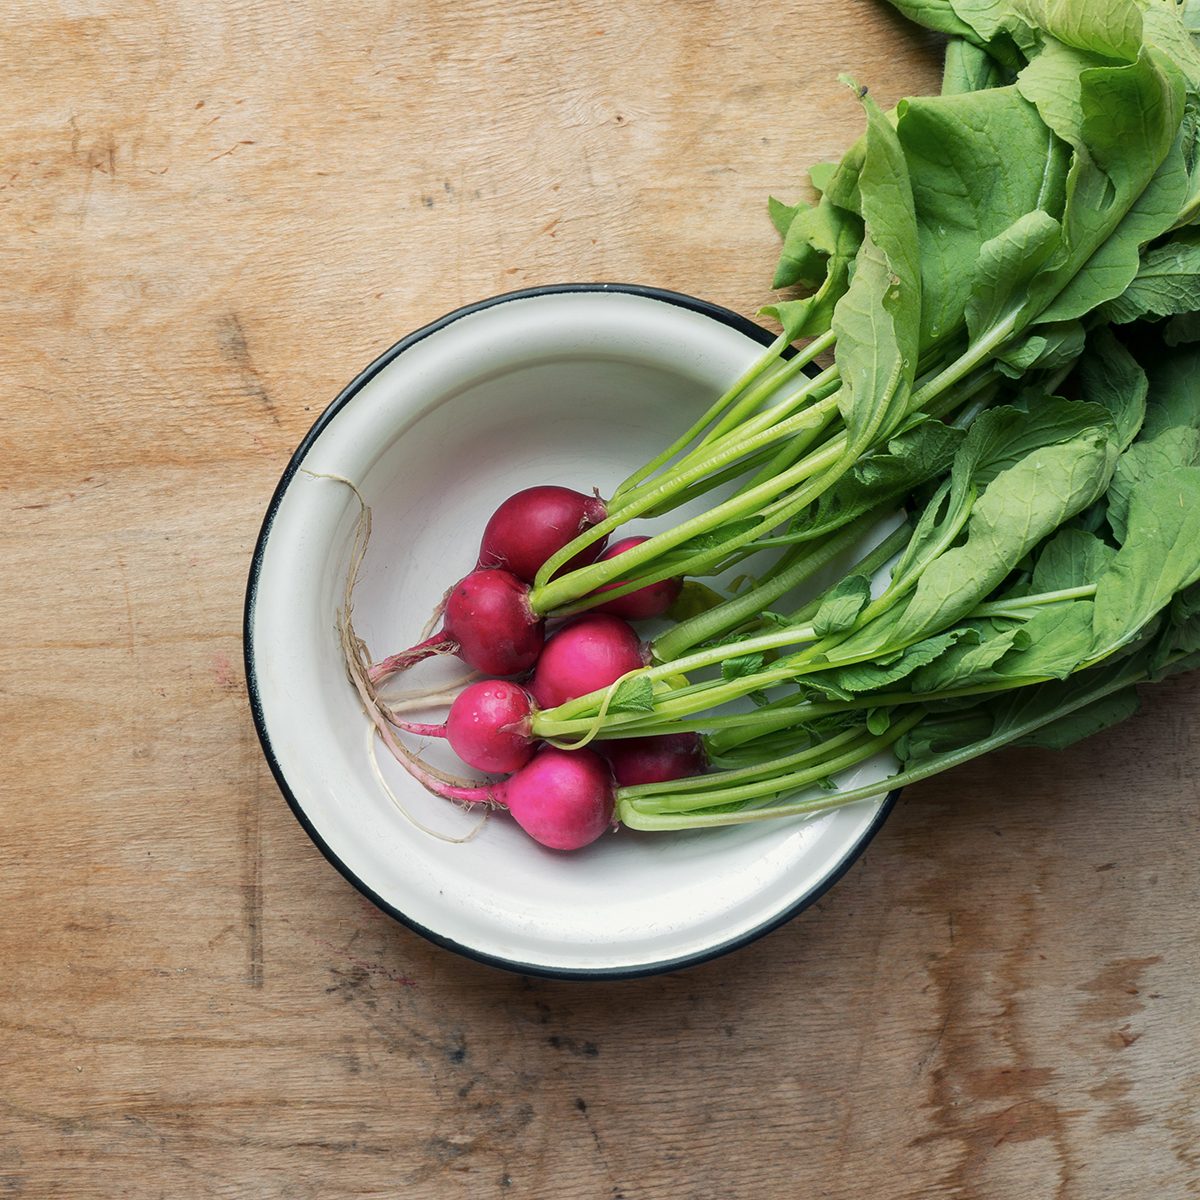 How to Use Different Types of Radishes - Bon Appétit